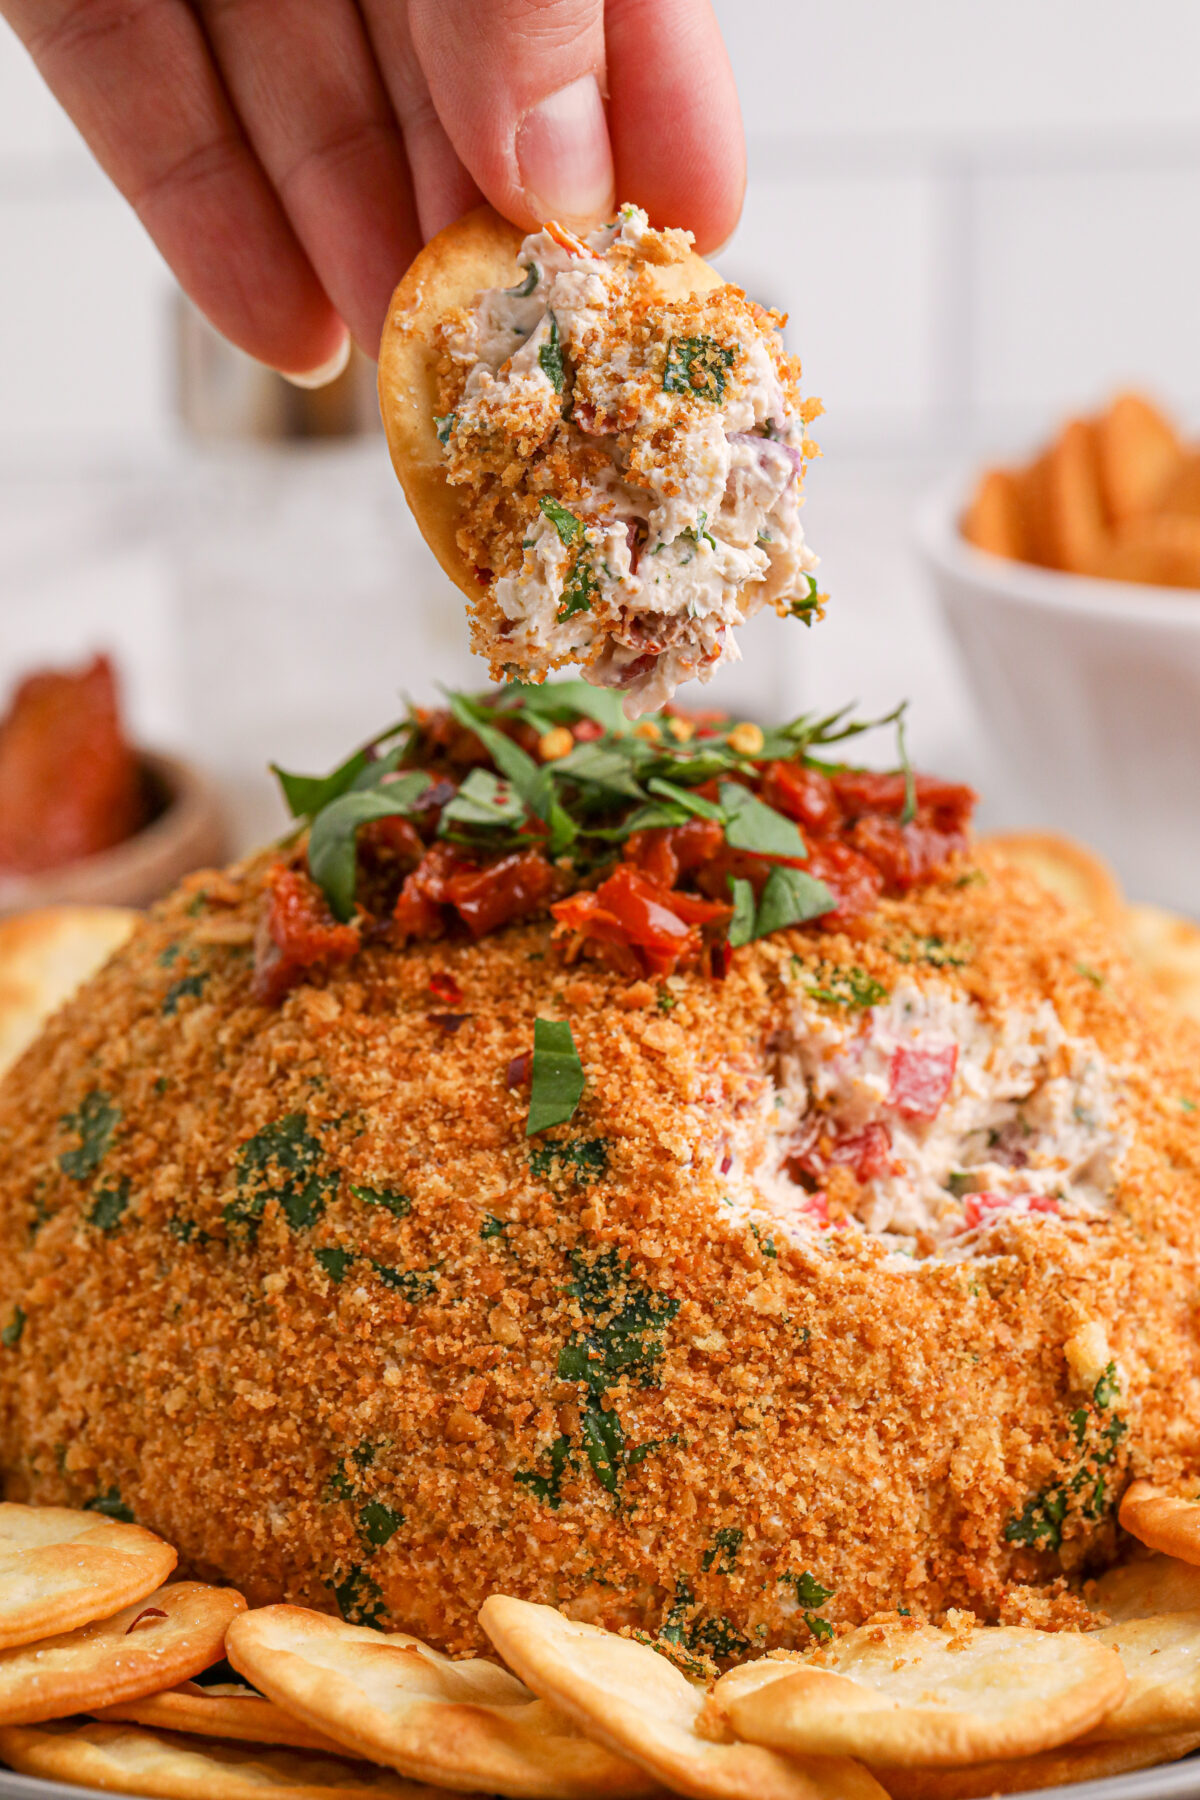 Elevate your party food game with this delicious and easy-to-make bruschetta cheese ball recipe. Your guests will thank you!